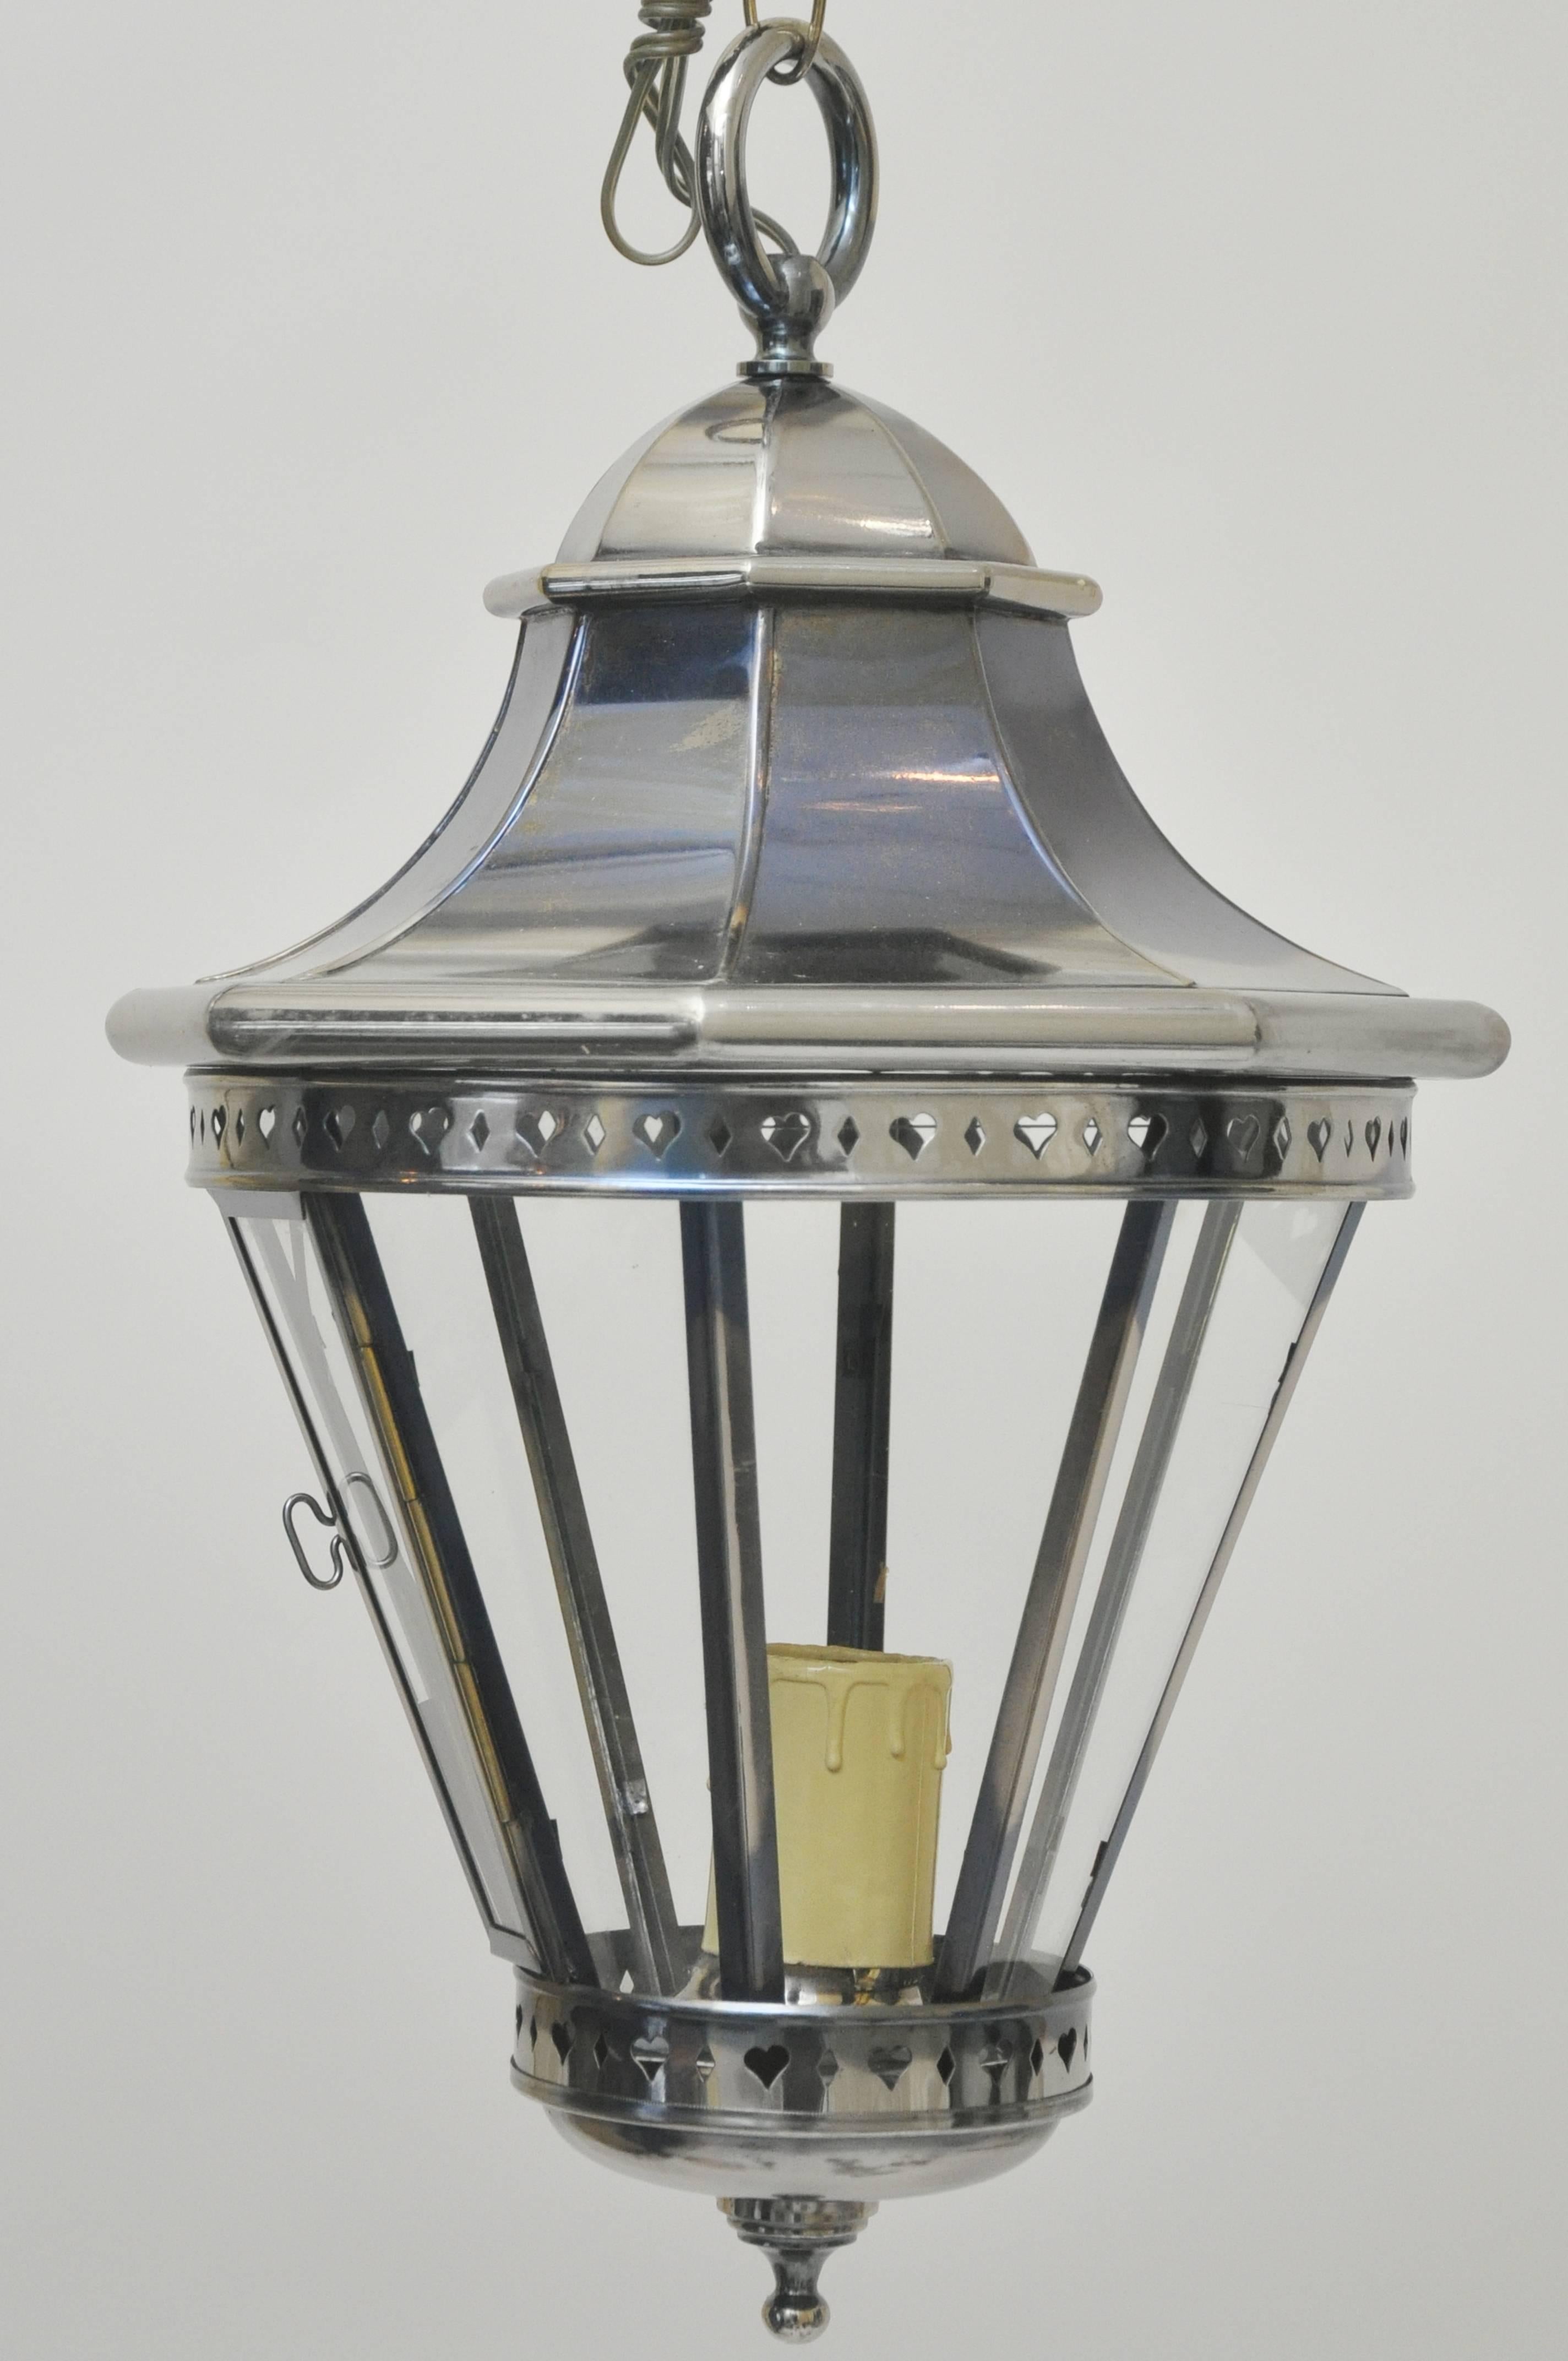 Beautifully made in Spain in the 1970s - a nickel-plated hanging pendant or lantern. Never used. The light has a single bulb socket for standard size up to 75 watts. Re-wired and ready to install. Original canopy plus 12 inches of chain. Dimensions